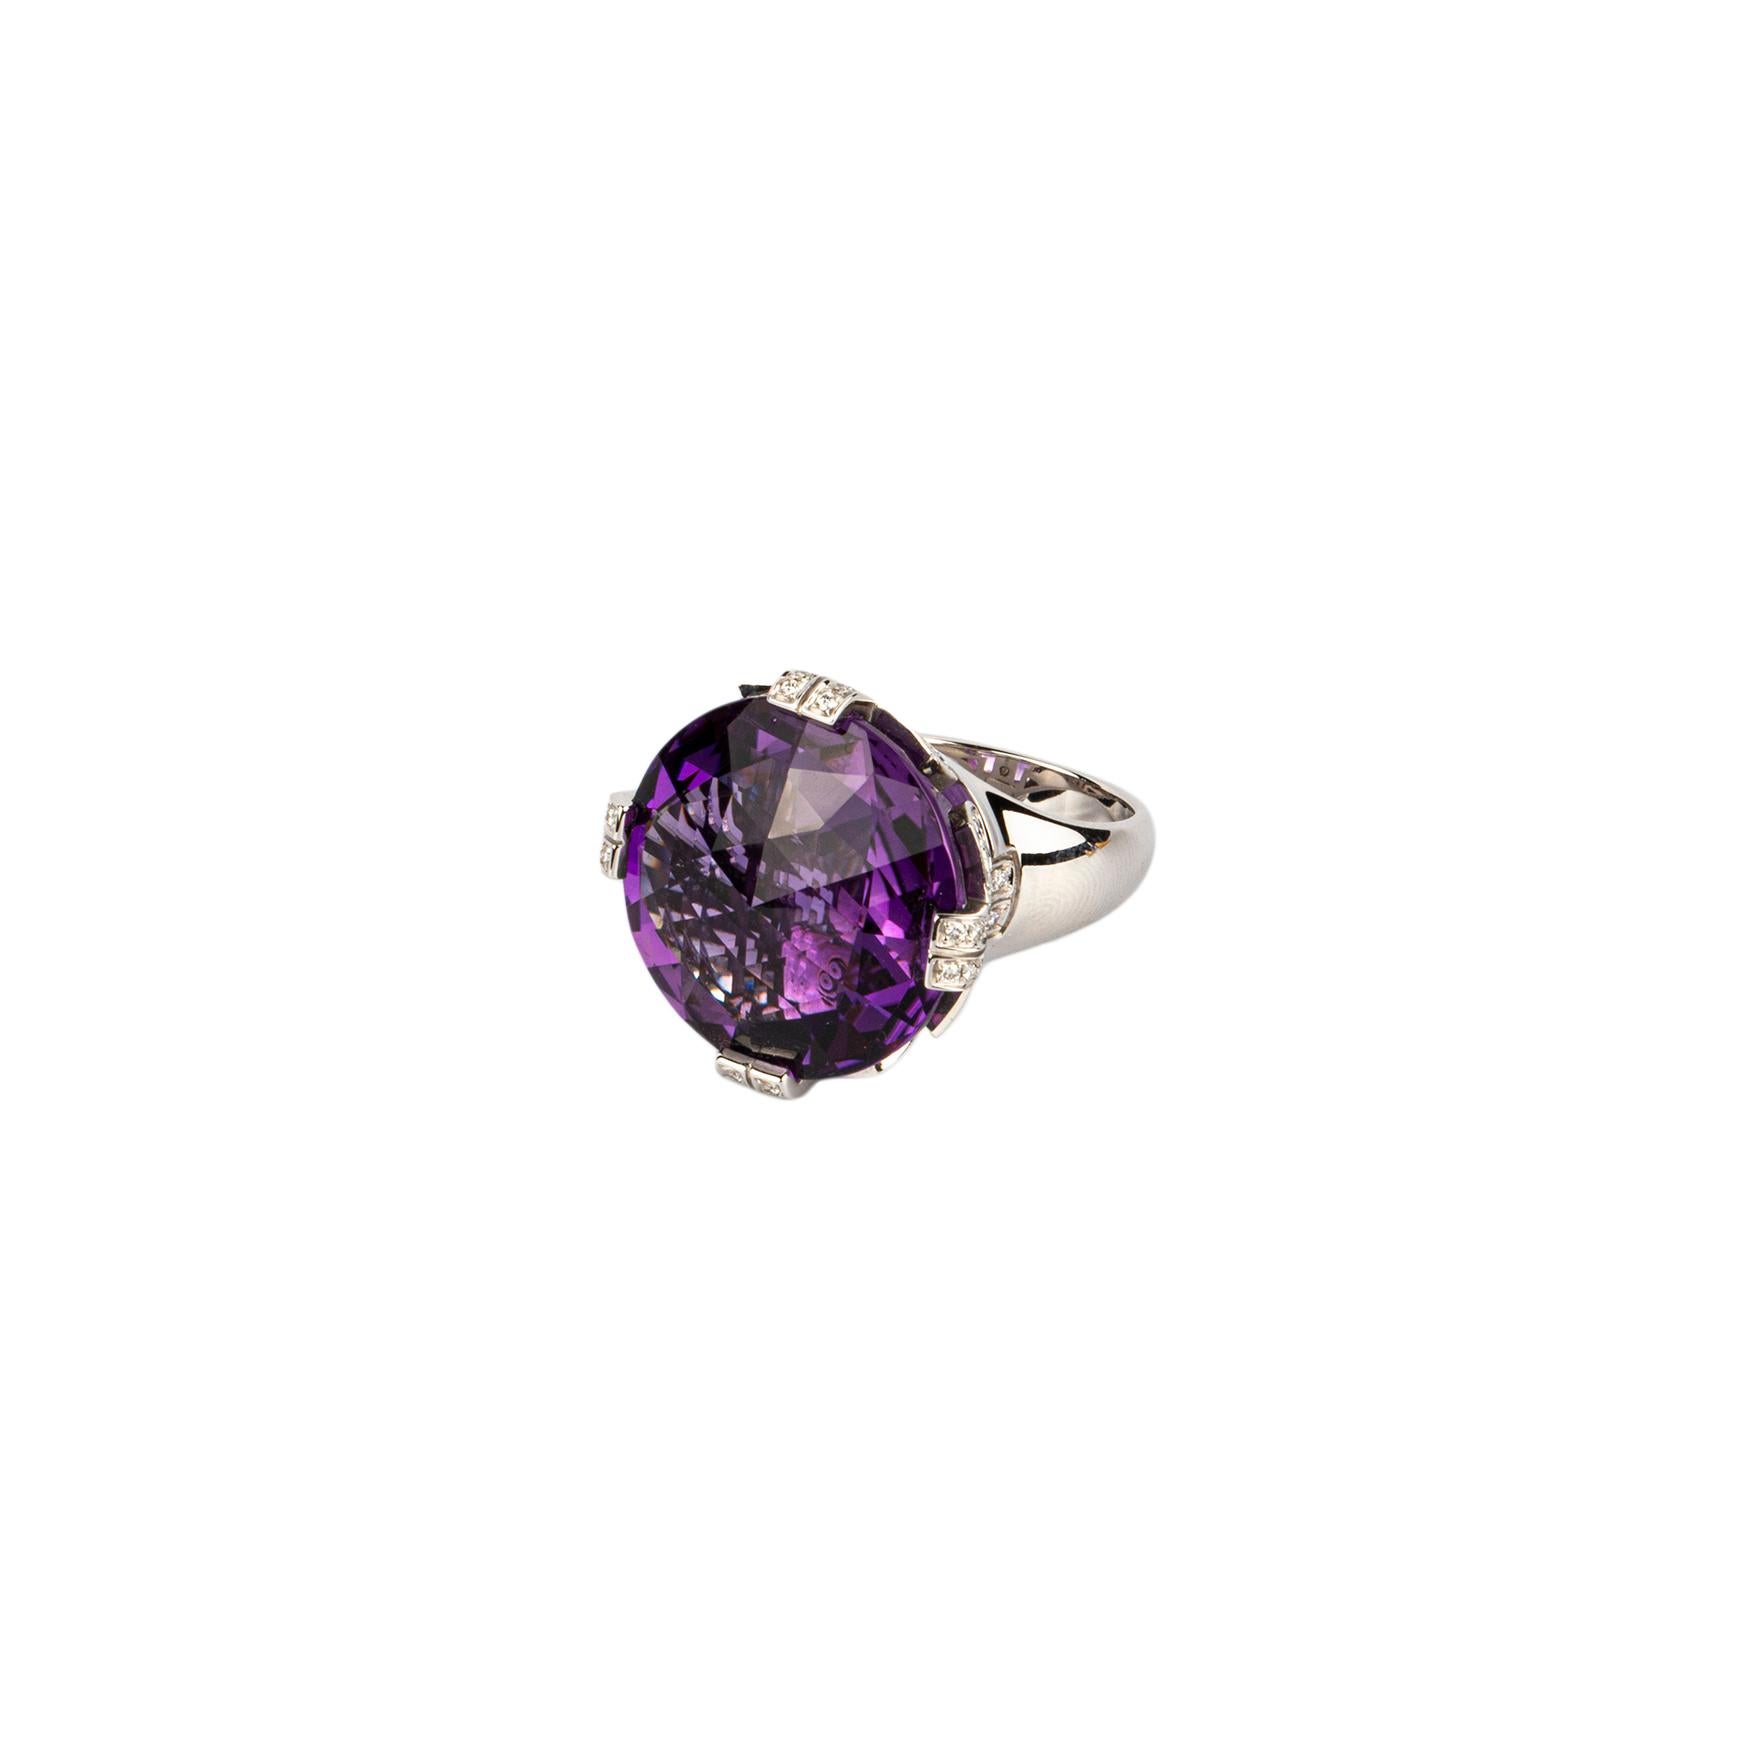 Bulgari ‘Parentesi’ ring in 18k white gold centered by a faceted amethyst with diamond details on the shank. Made in Italy, circa 1980.